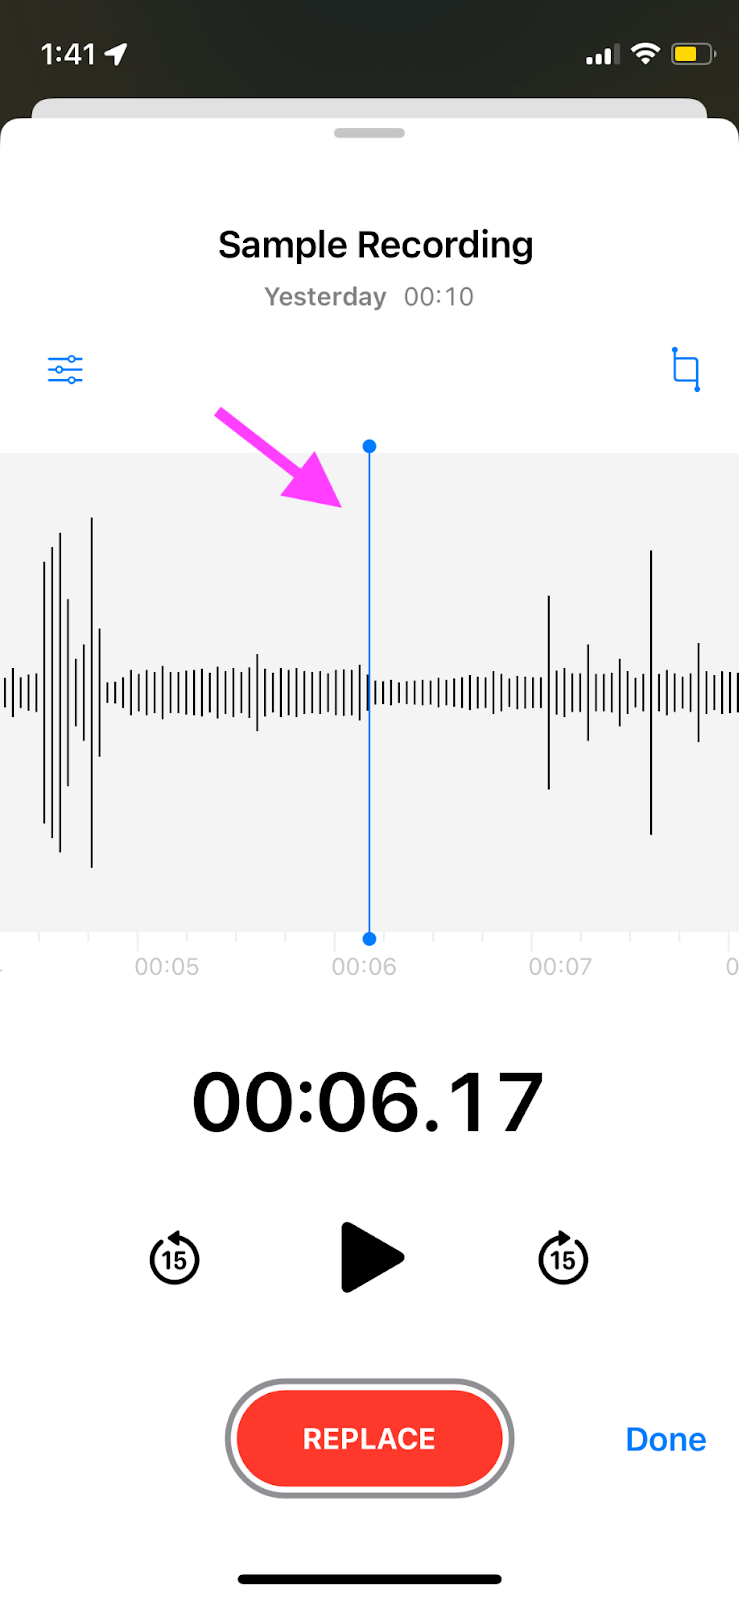 How to record a voice note on iPhone - Edit recording